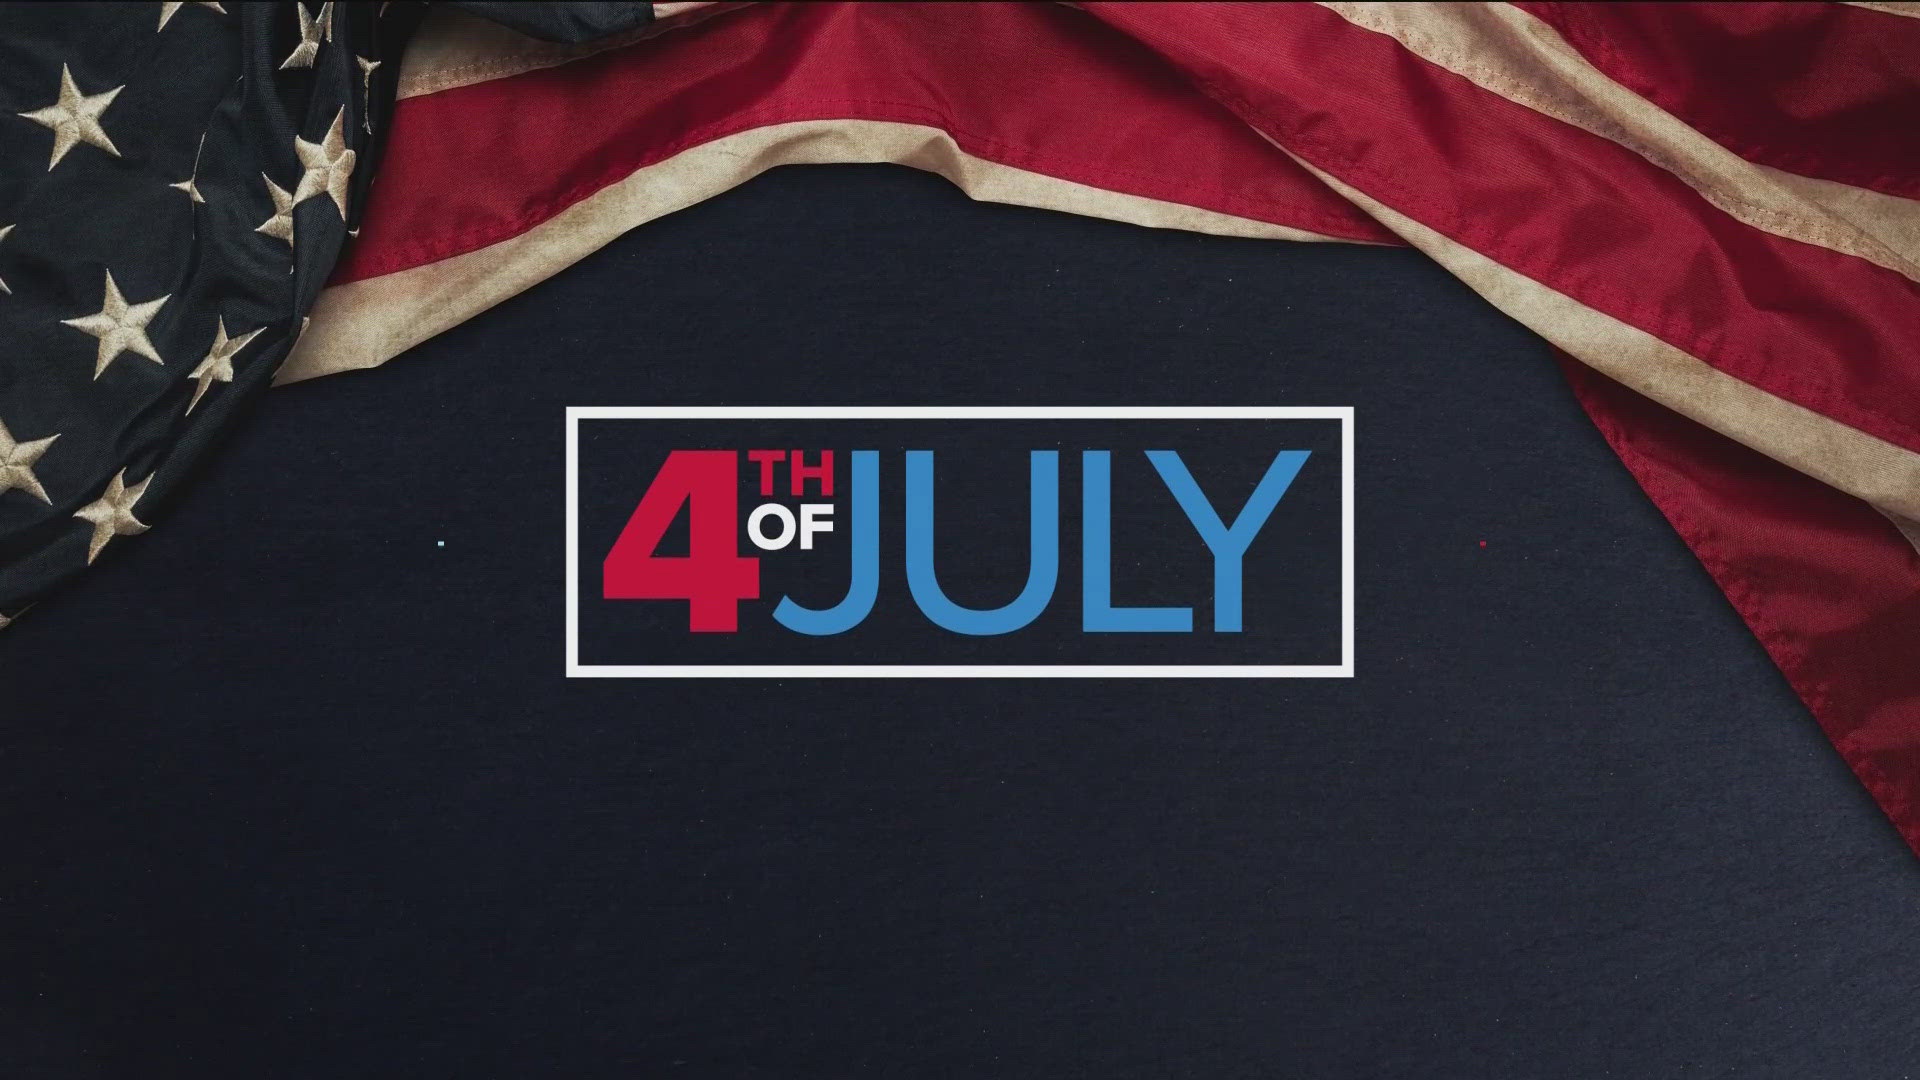 Here are the top stories around San Diego County for the morning of Thursday, July 4th.
For the latest news, weather and sports, head to:
https://www.cbs8.com/